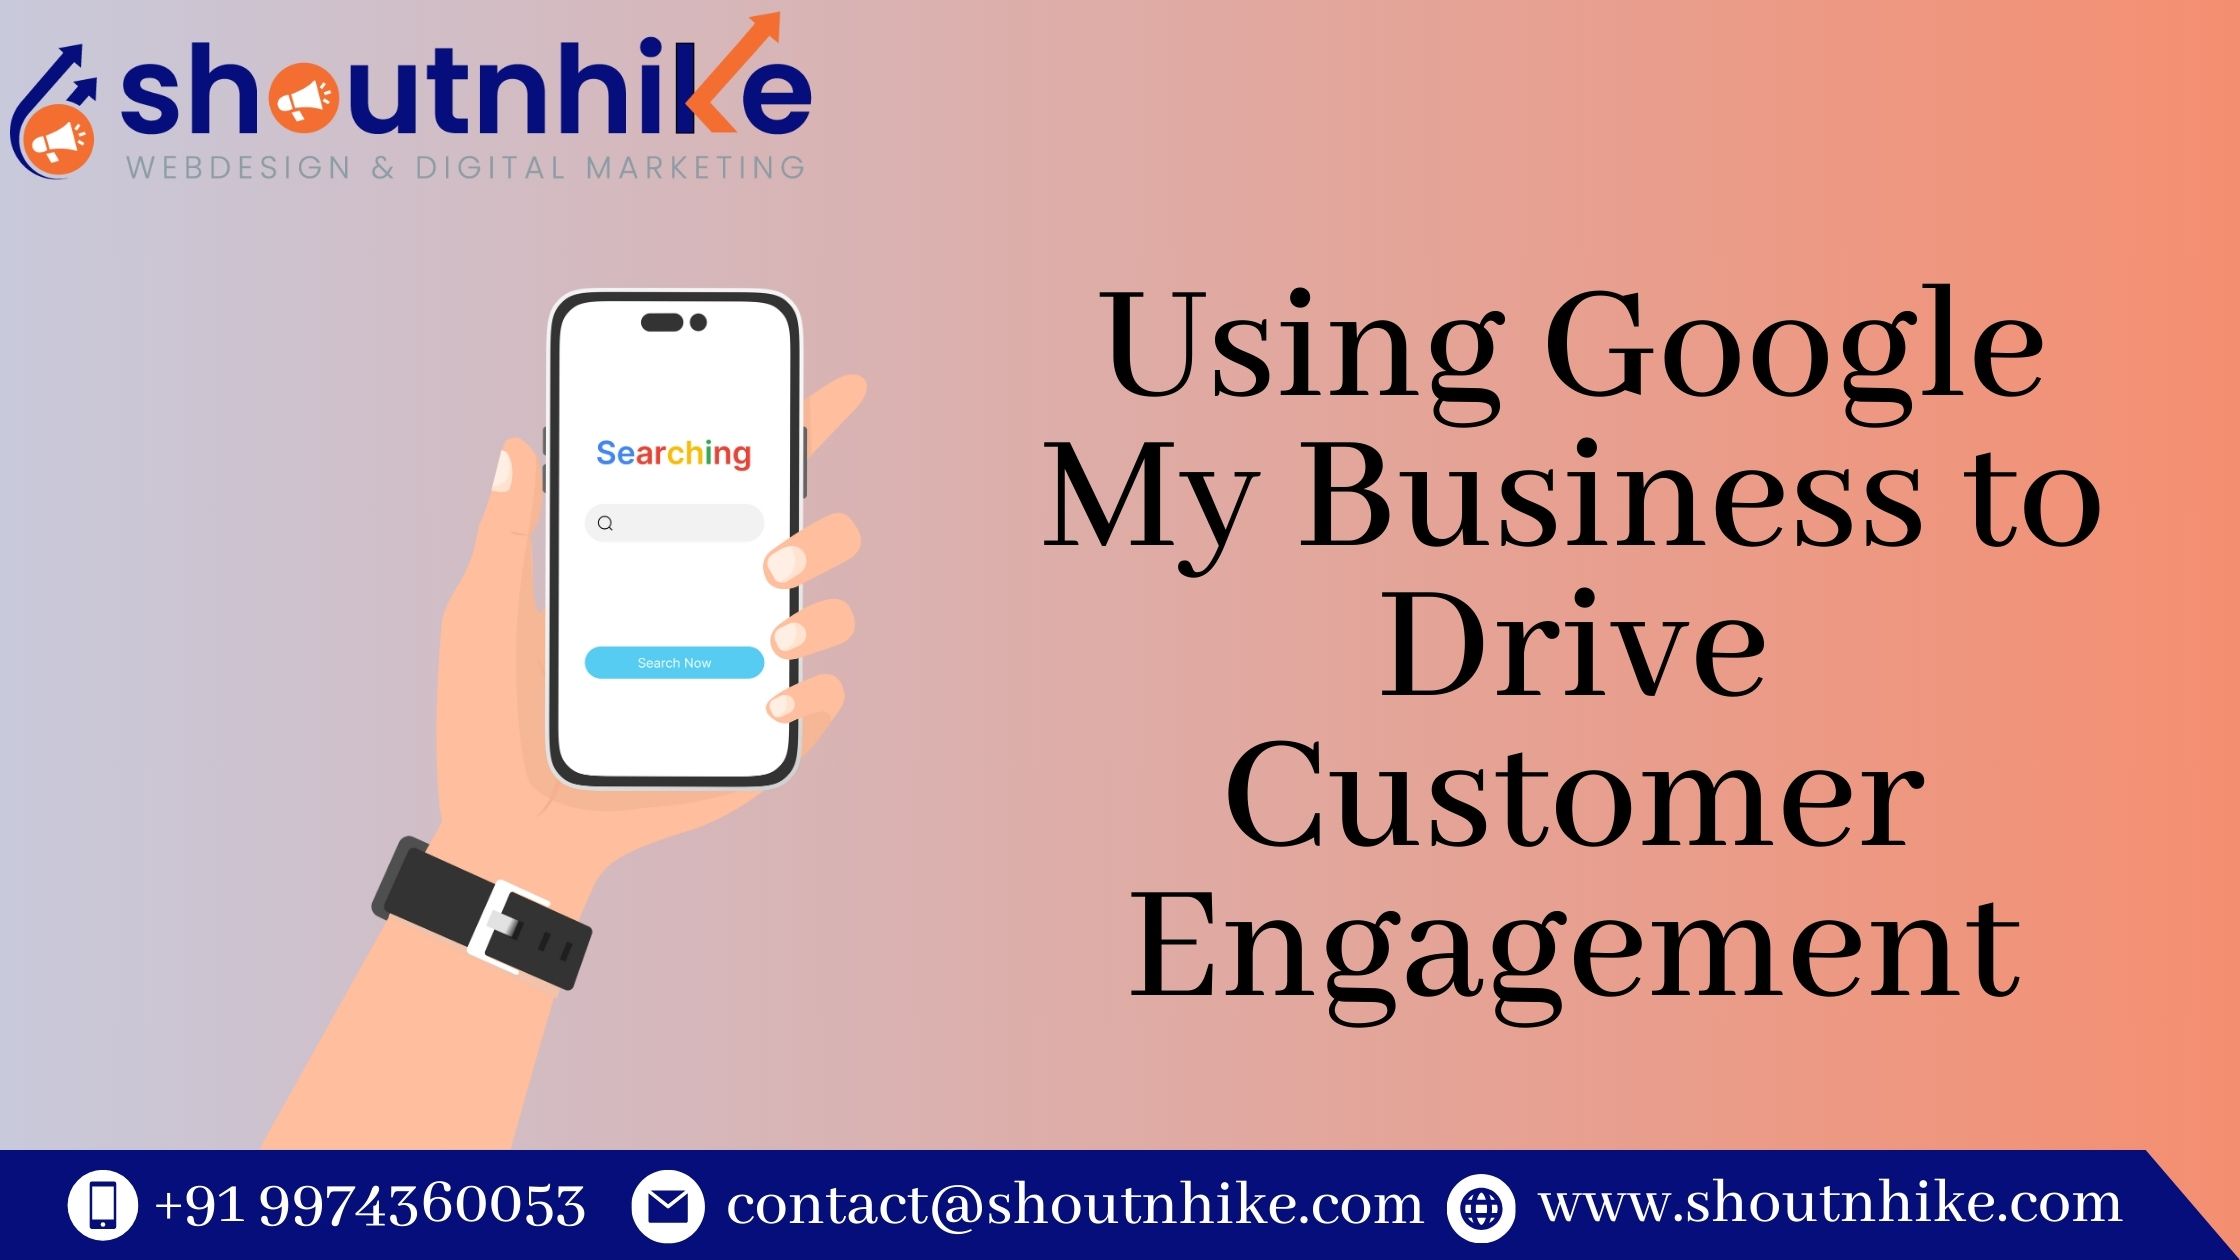 Using Google My Business to Drive Customer Engagement